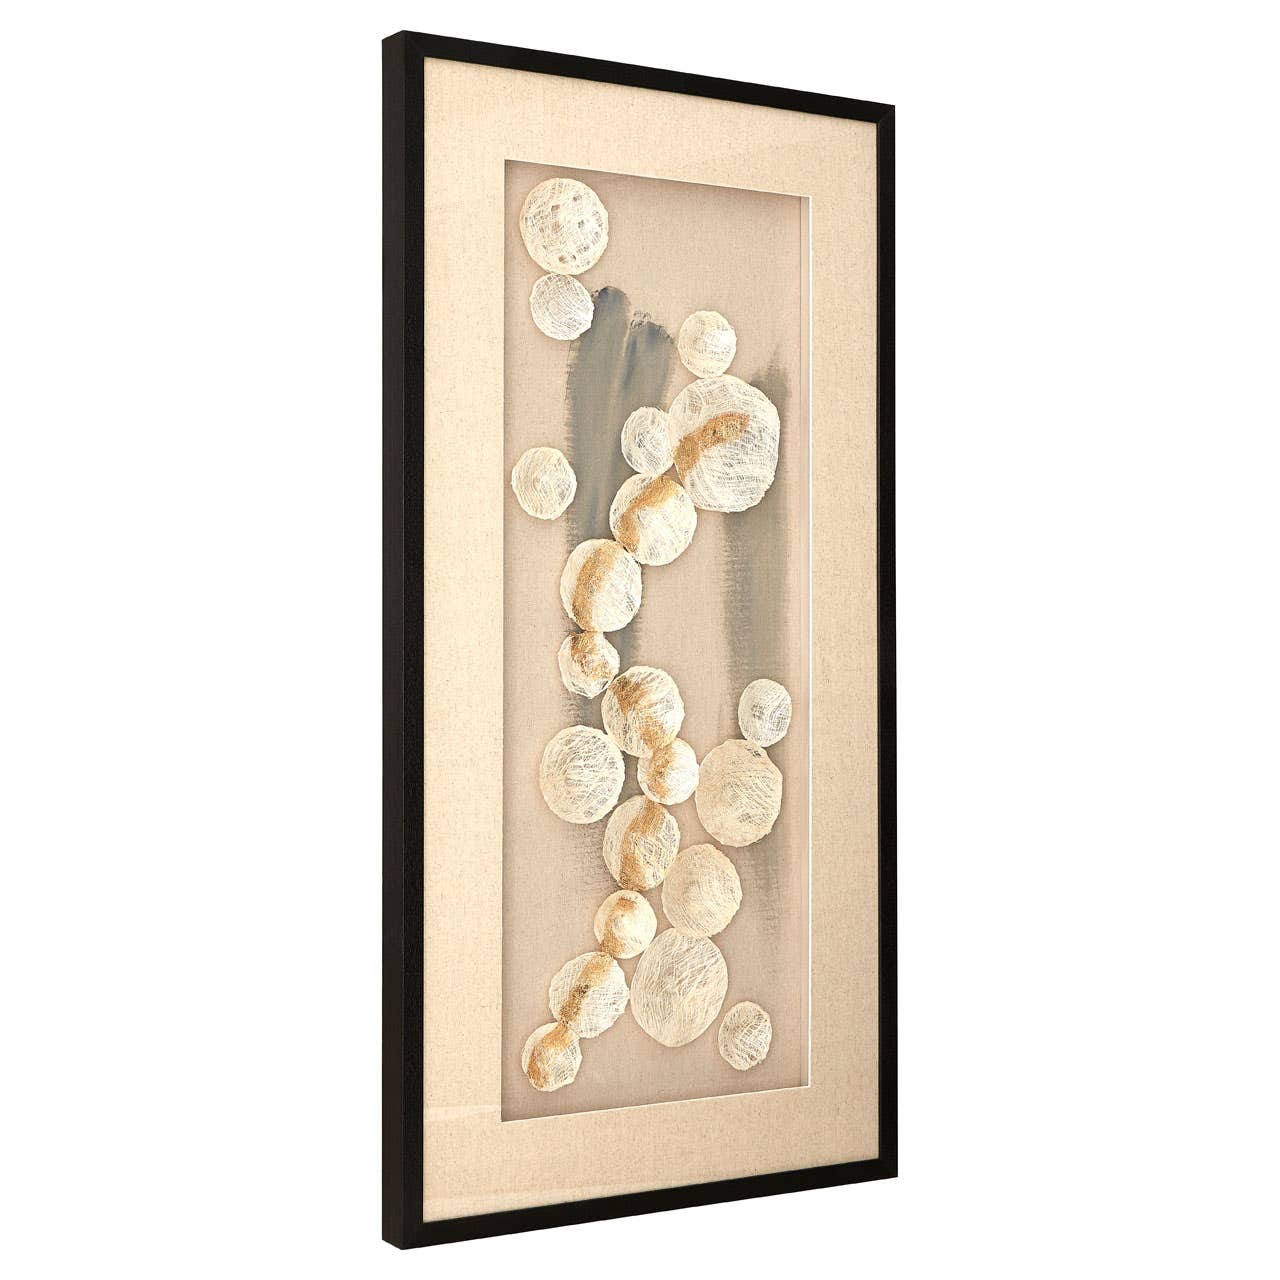 Noosa & Co. Accessories Modello Paper Sculpture Wall Art House of Isabella UK